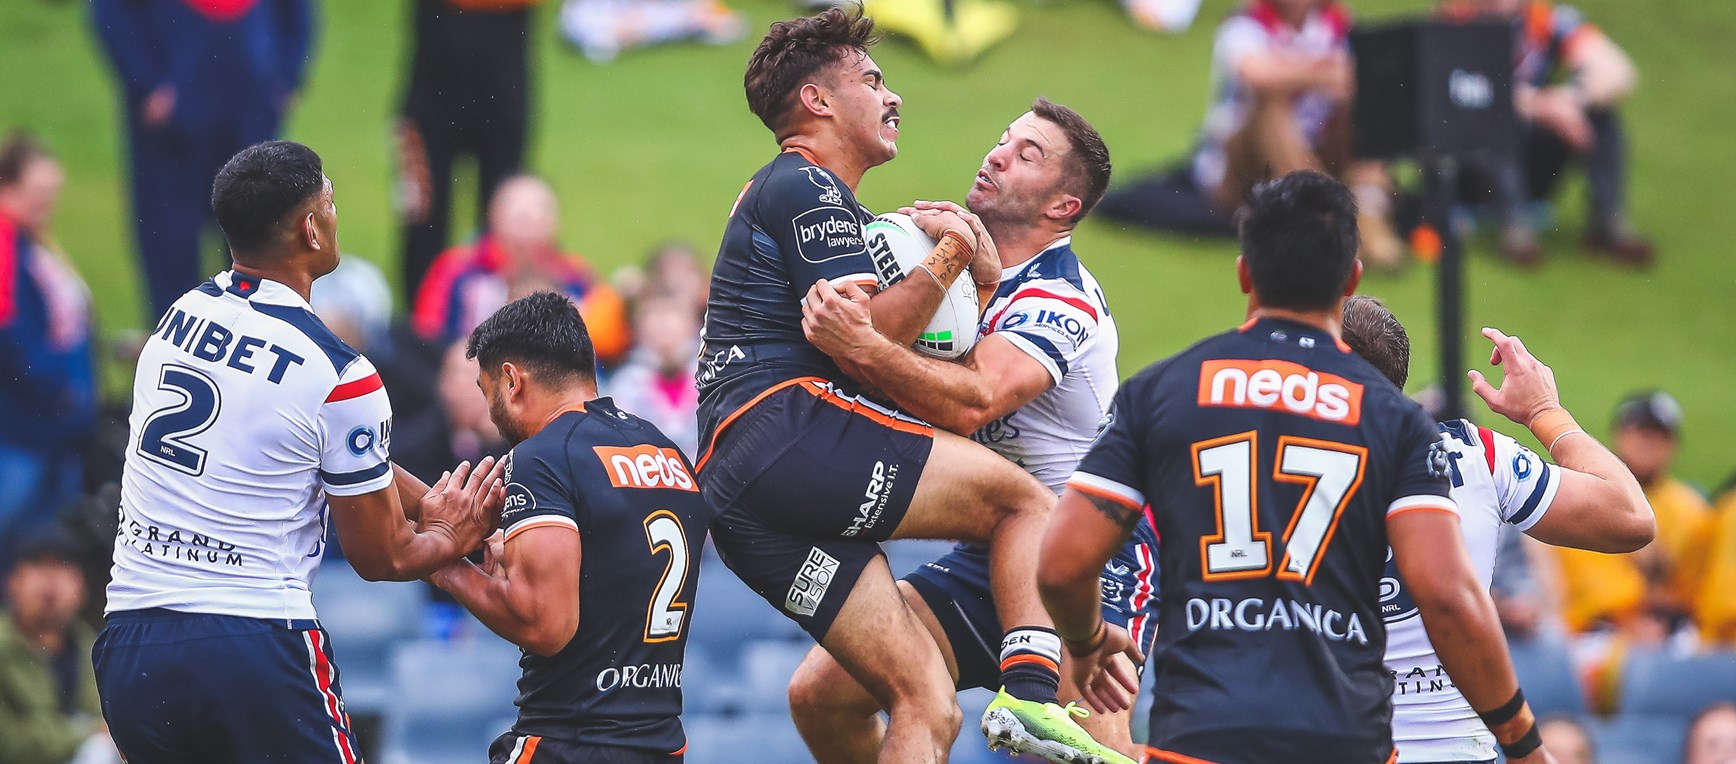 The best photos from Campbelltown clash!